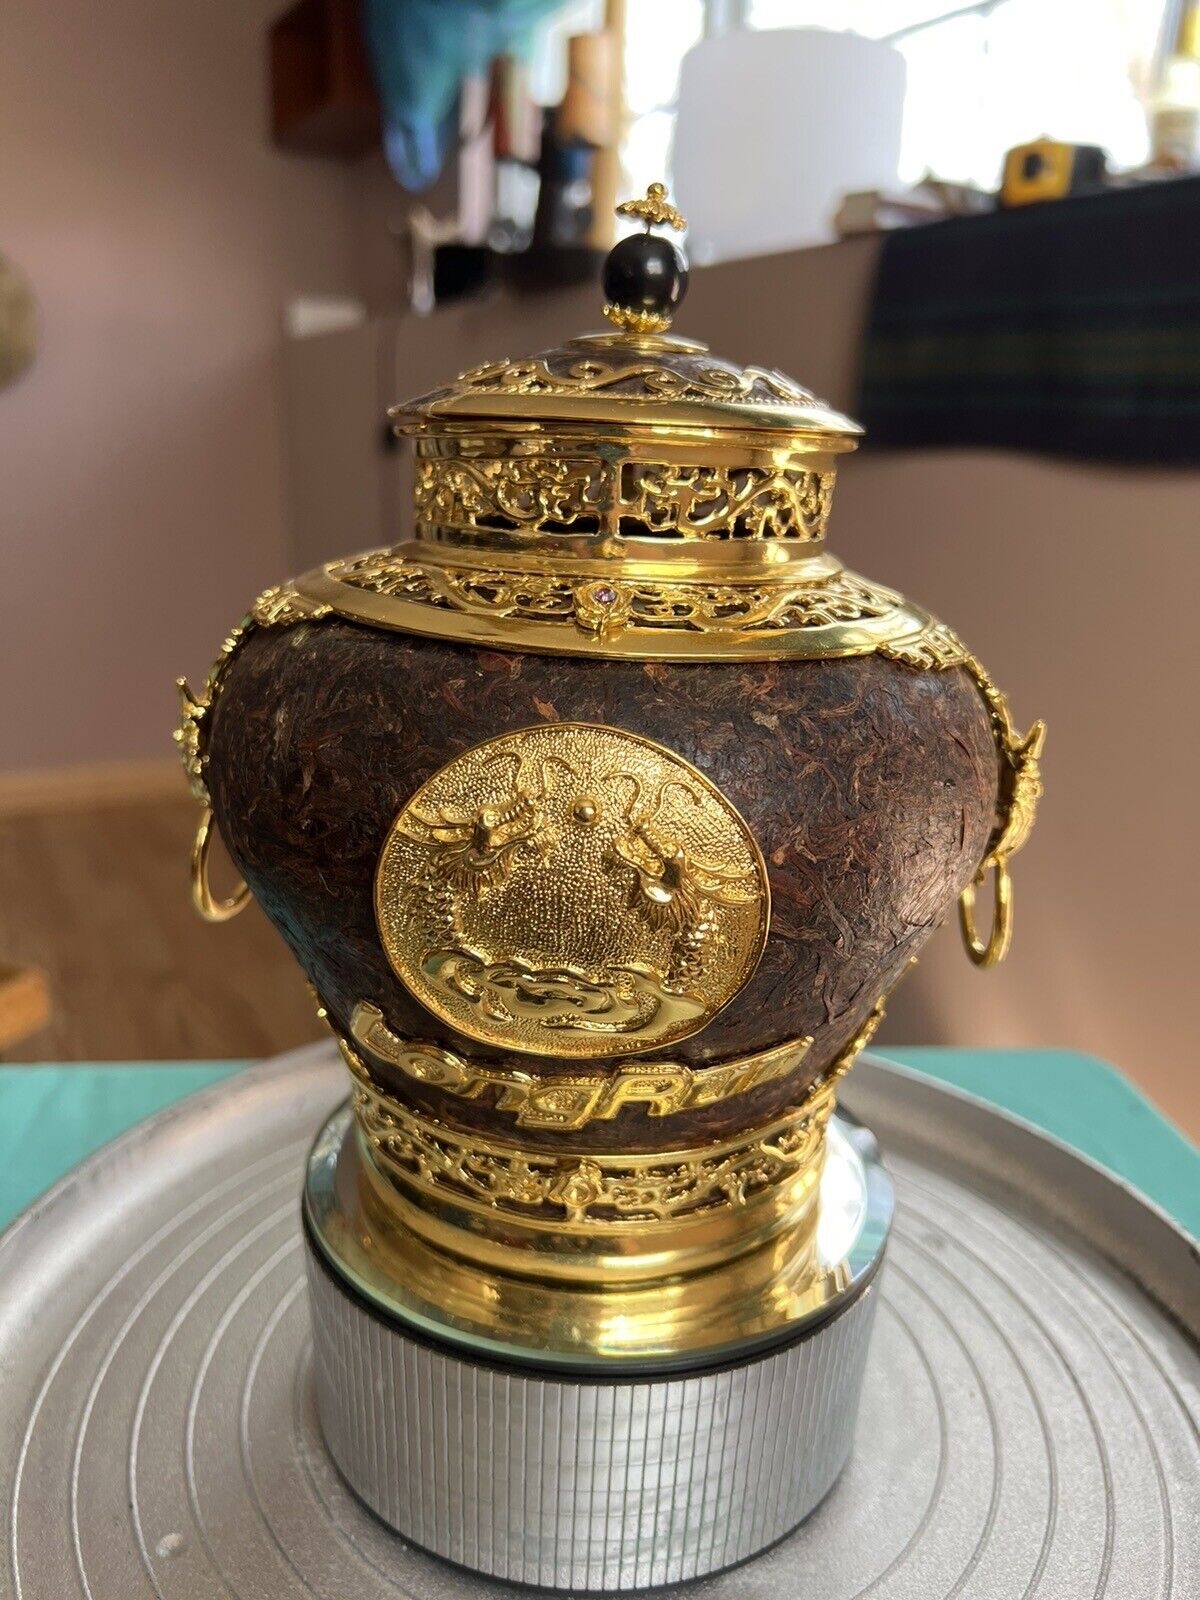 Unique Pot Made From Pu-Ehr Tea. One Of A Kind. Tea Business Uniqueness